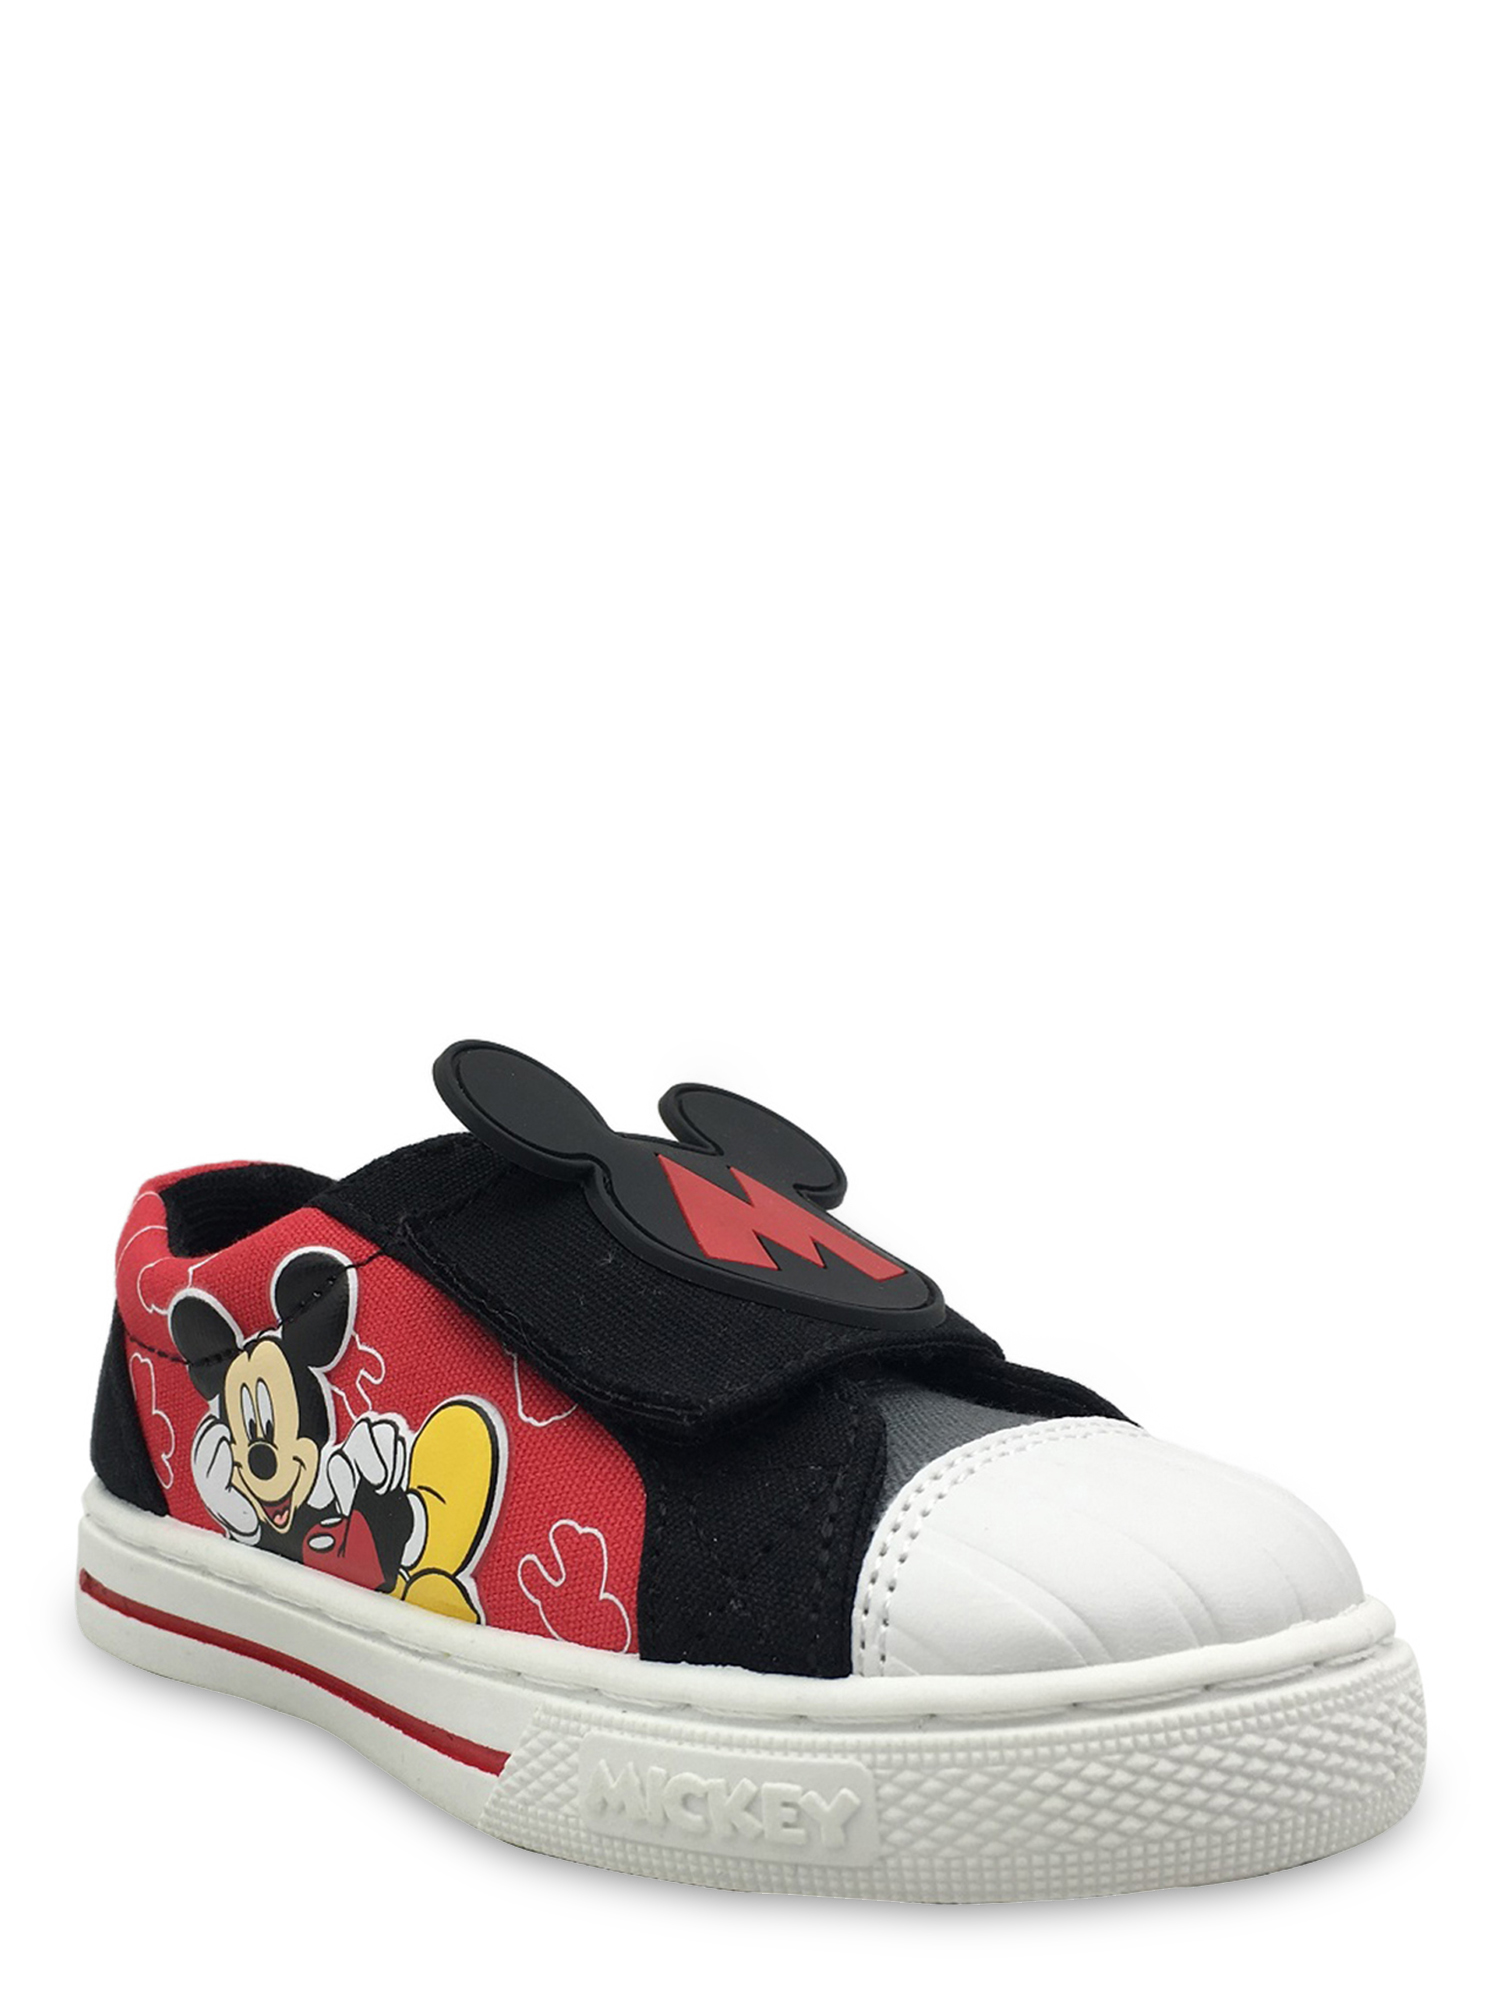 Mickey Mouse Cap Toe Casual Sneaker (Toddler Boys) - image 1 of 8